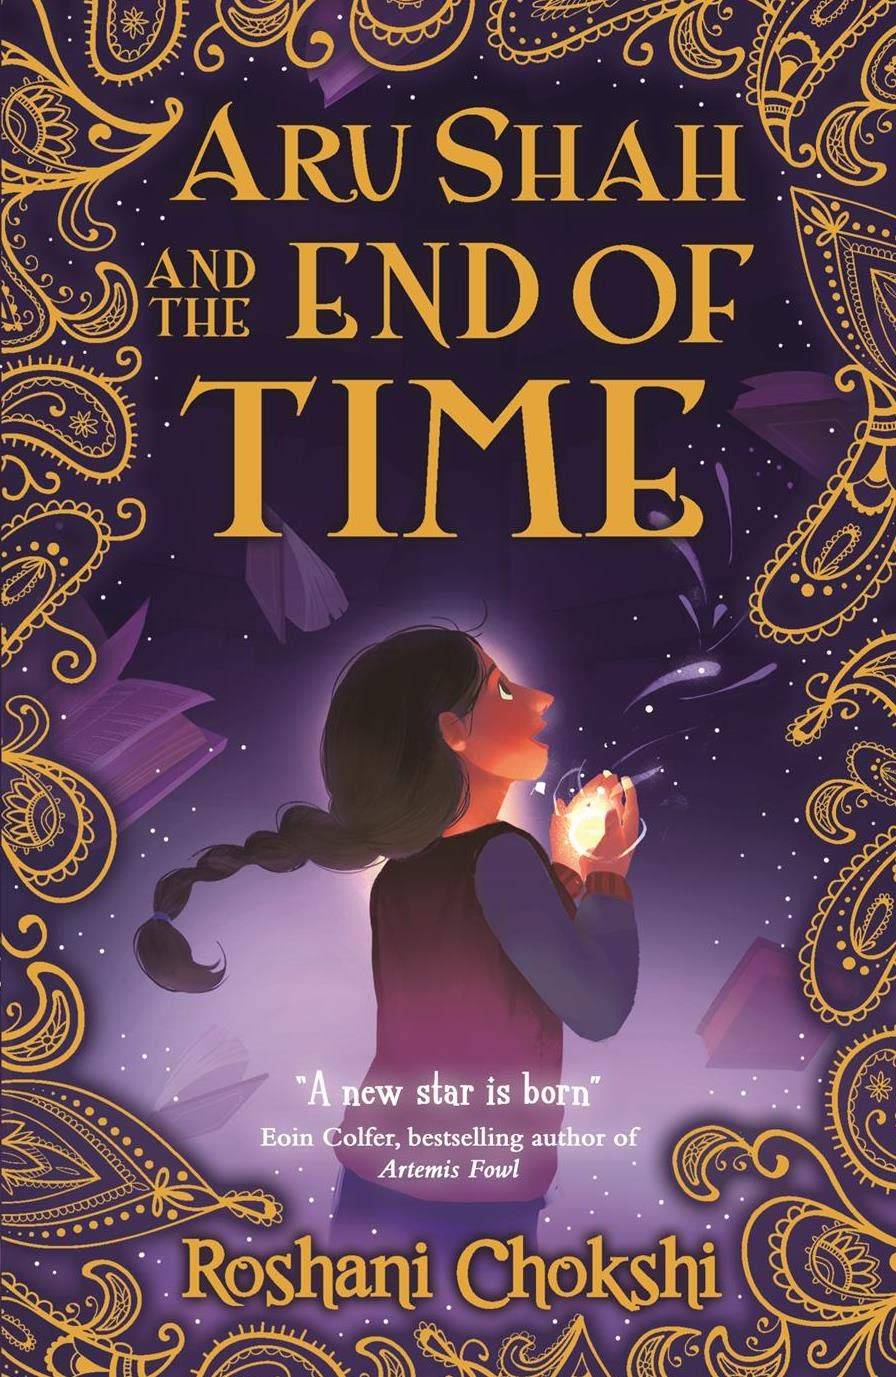 IMG : Aru Shah and the End of Time #1